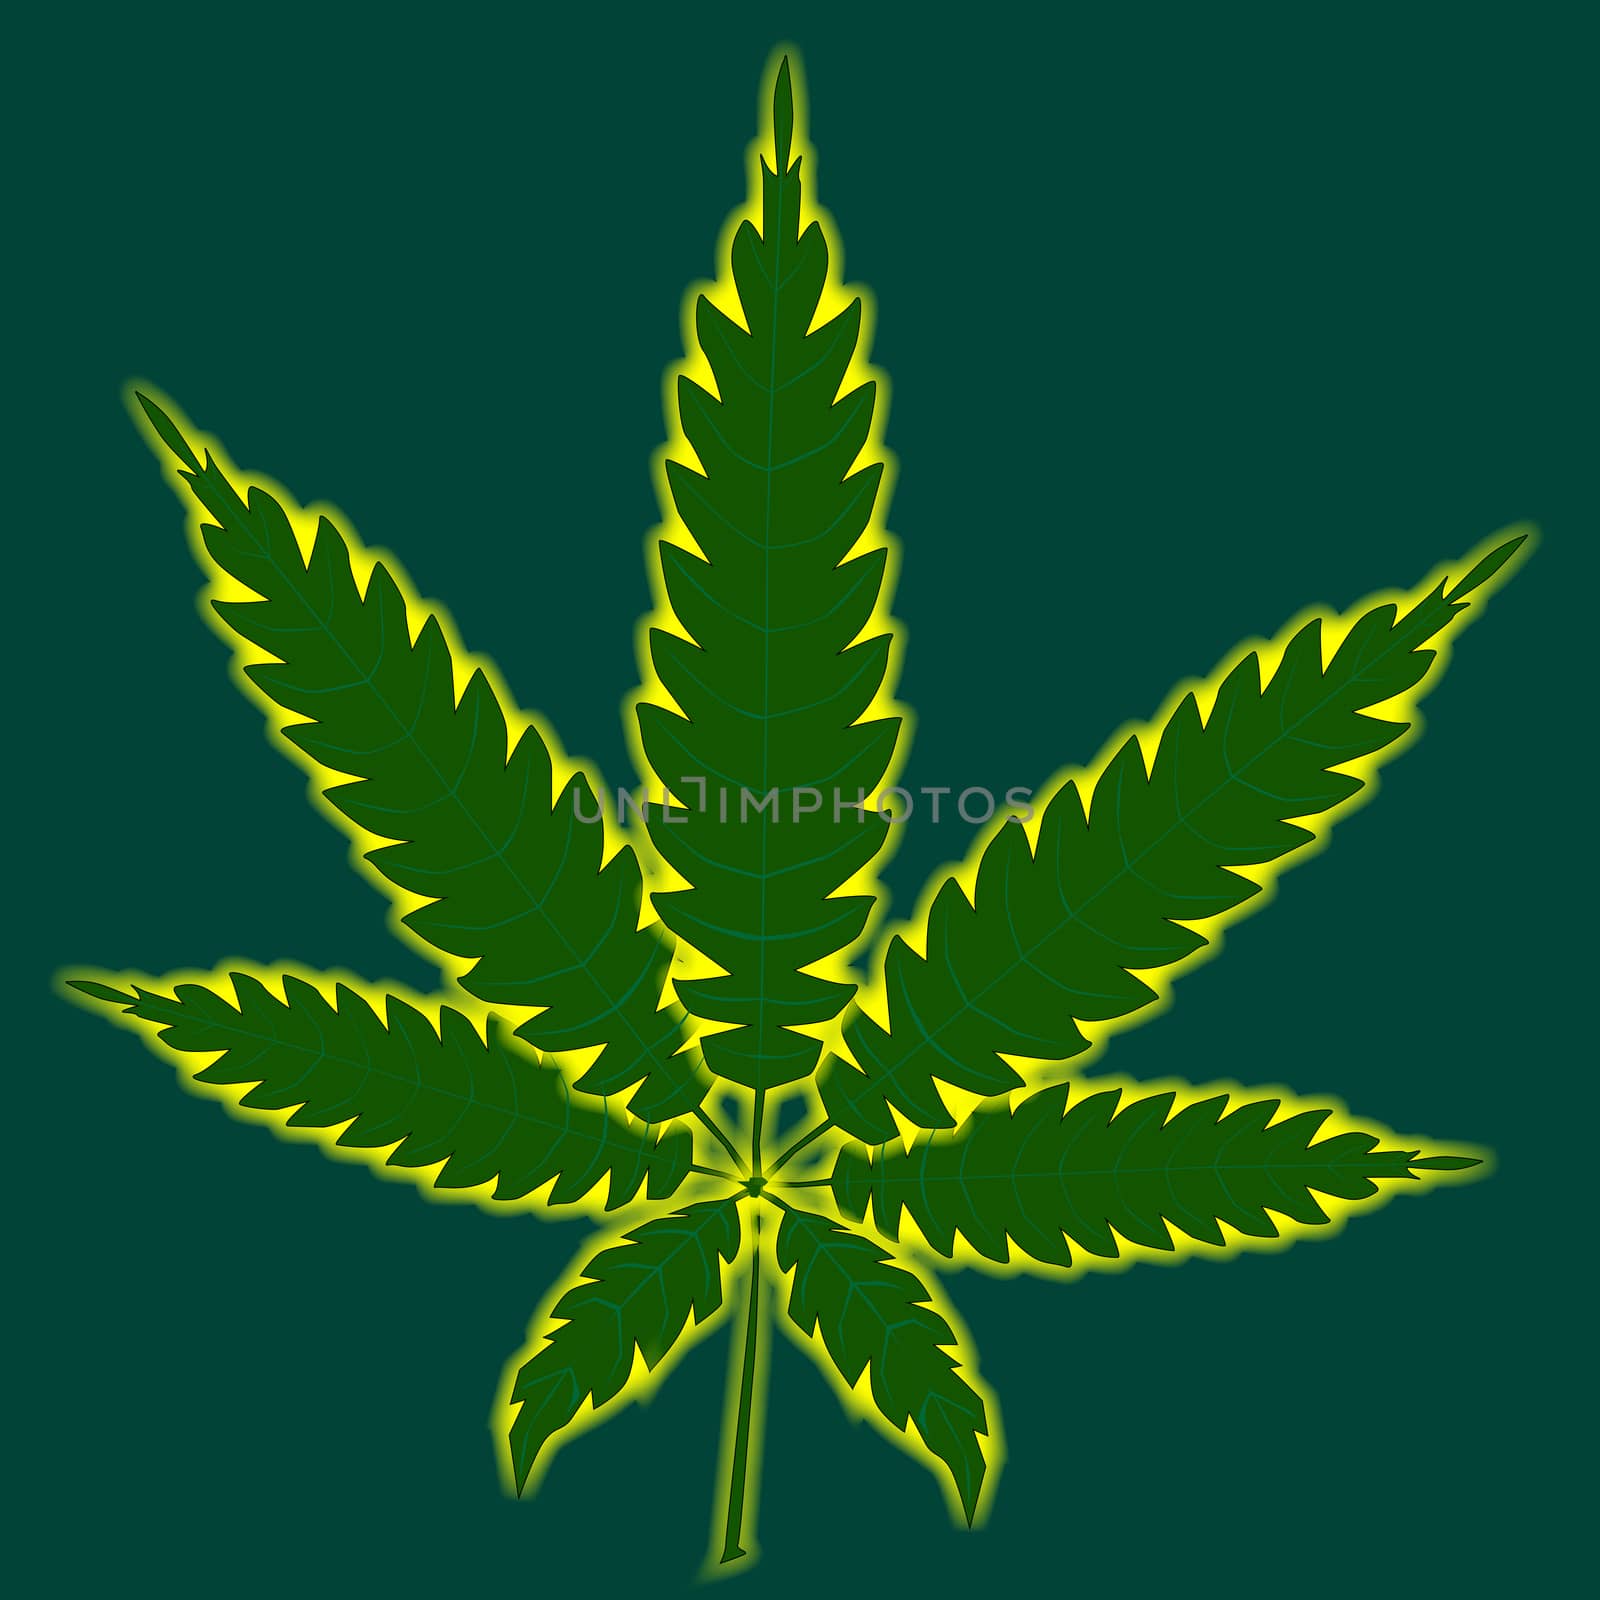 A cannabis leaf isolated over a green background.